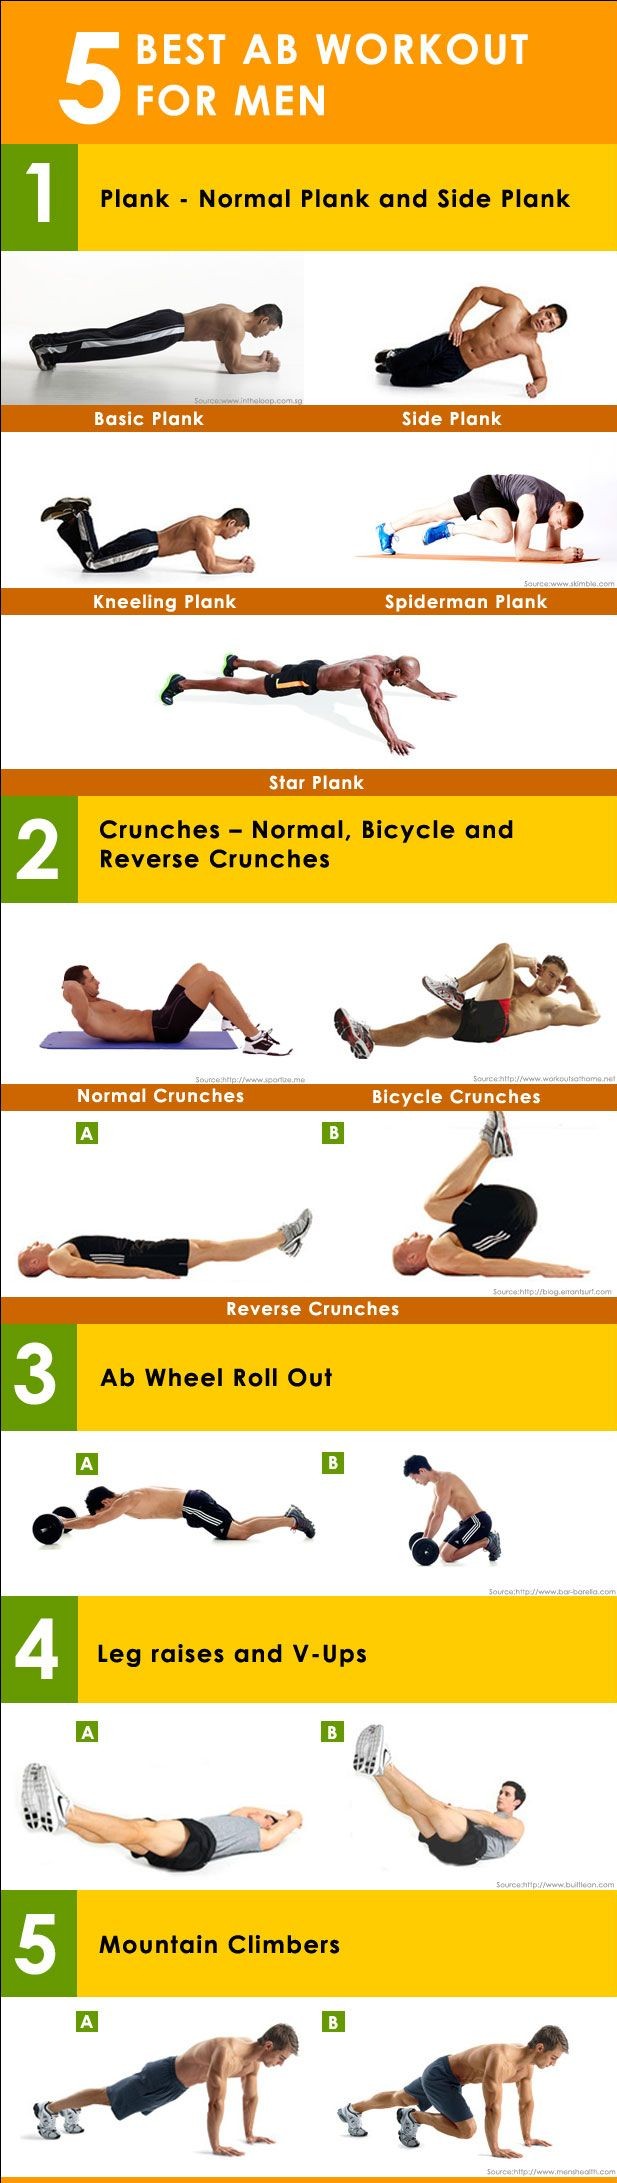 5 abs exercises